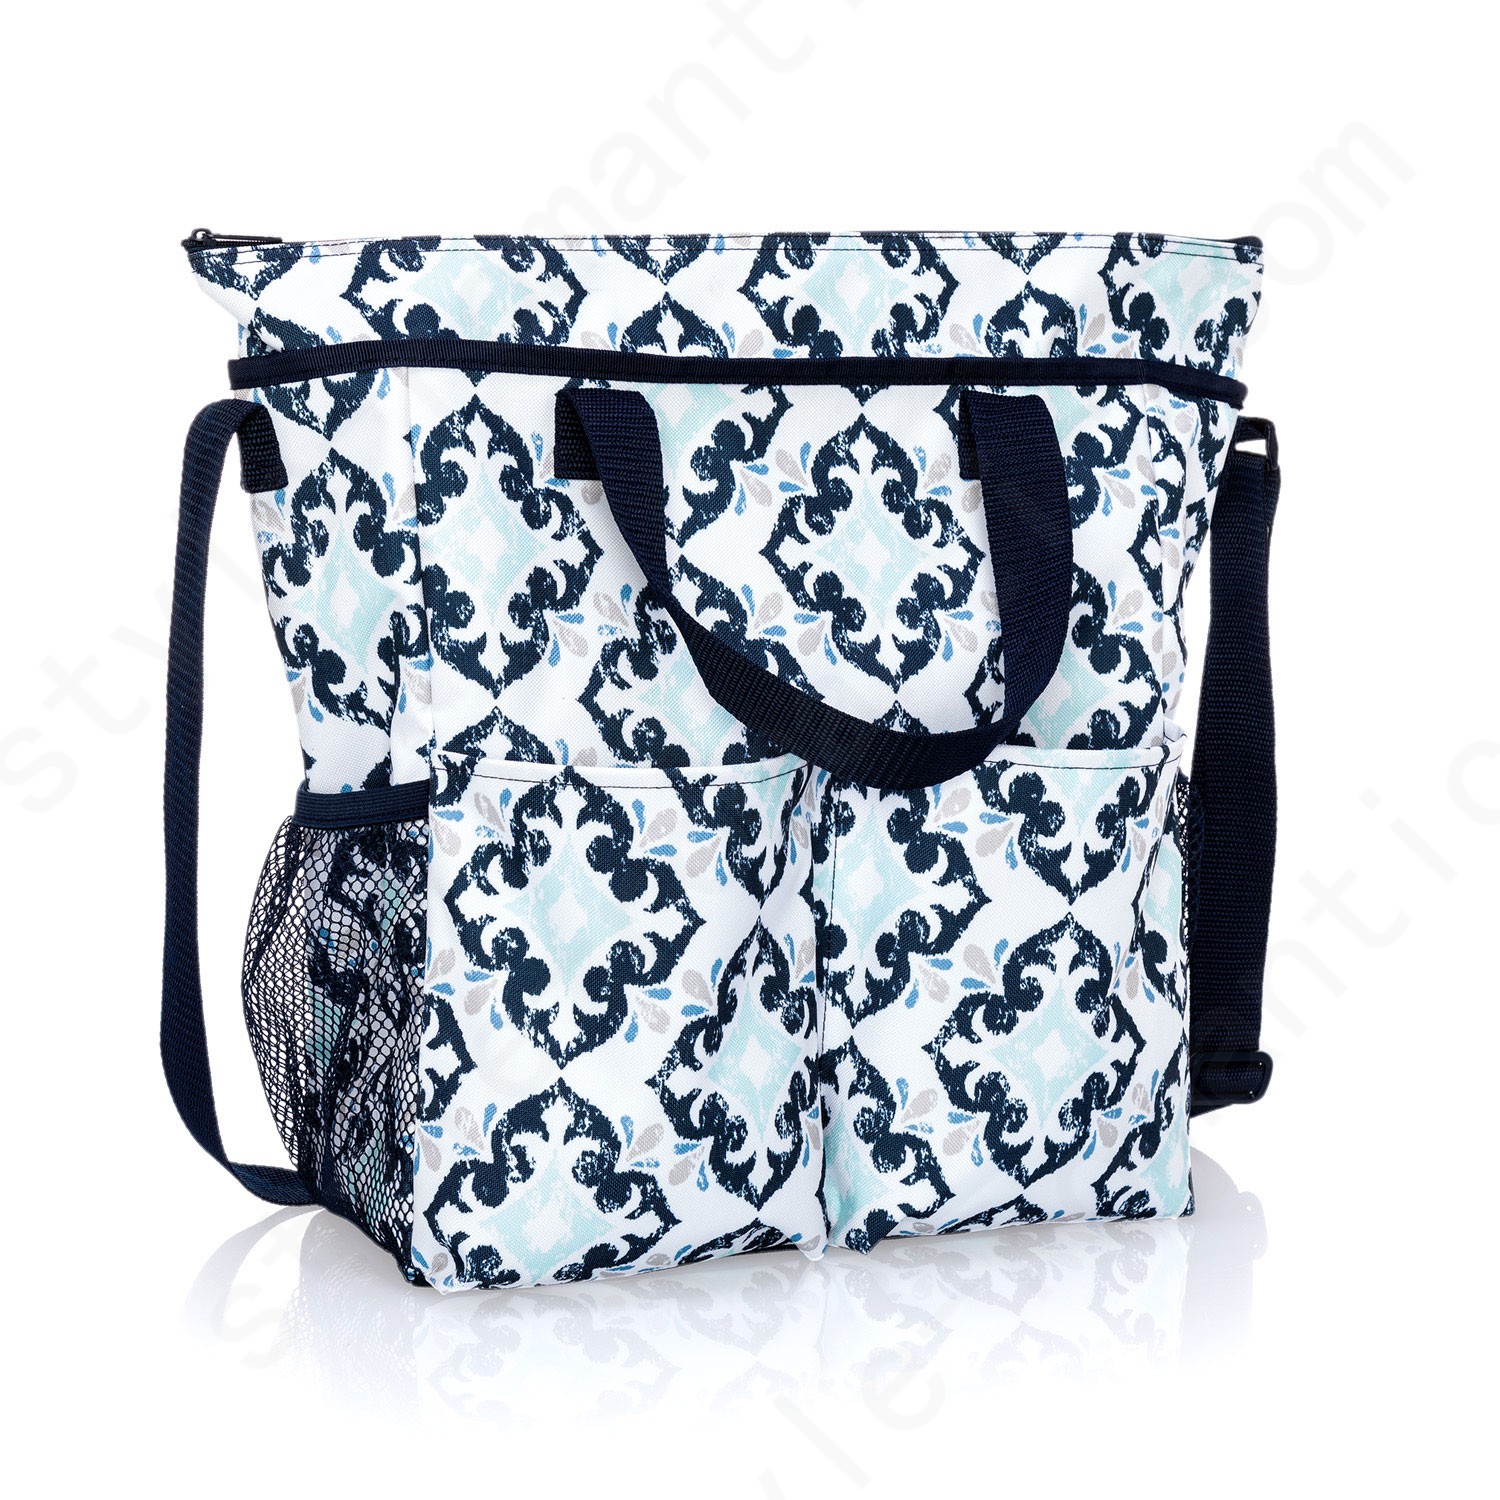 Thirty-One Gifts Crossbody Organizing Tote - Fab Flourish Handbags Accessories - Thirty-One Gifts Crossbody Organizing Tote - Fab Flourish Handbags Accessories